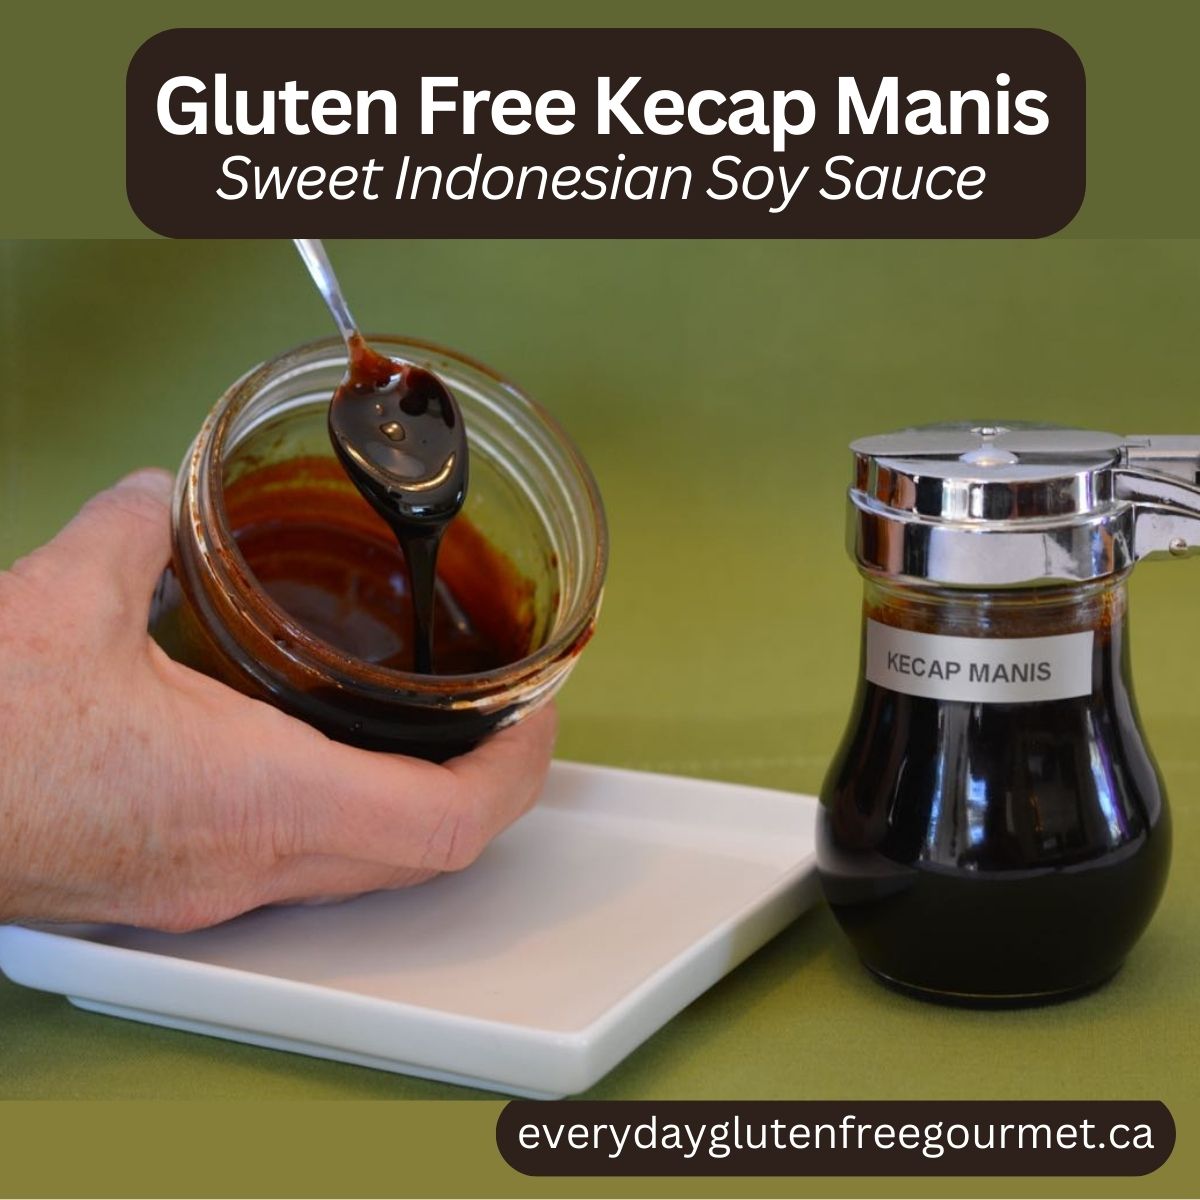 A syrup jar filled with gluten free kecap manis and another jar with a hand holding a spoon showing the thickness of the kecap manis.